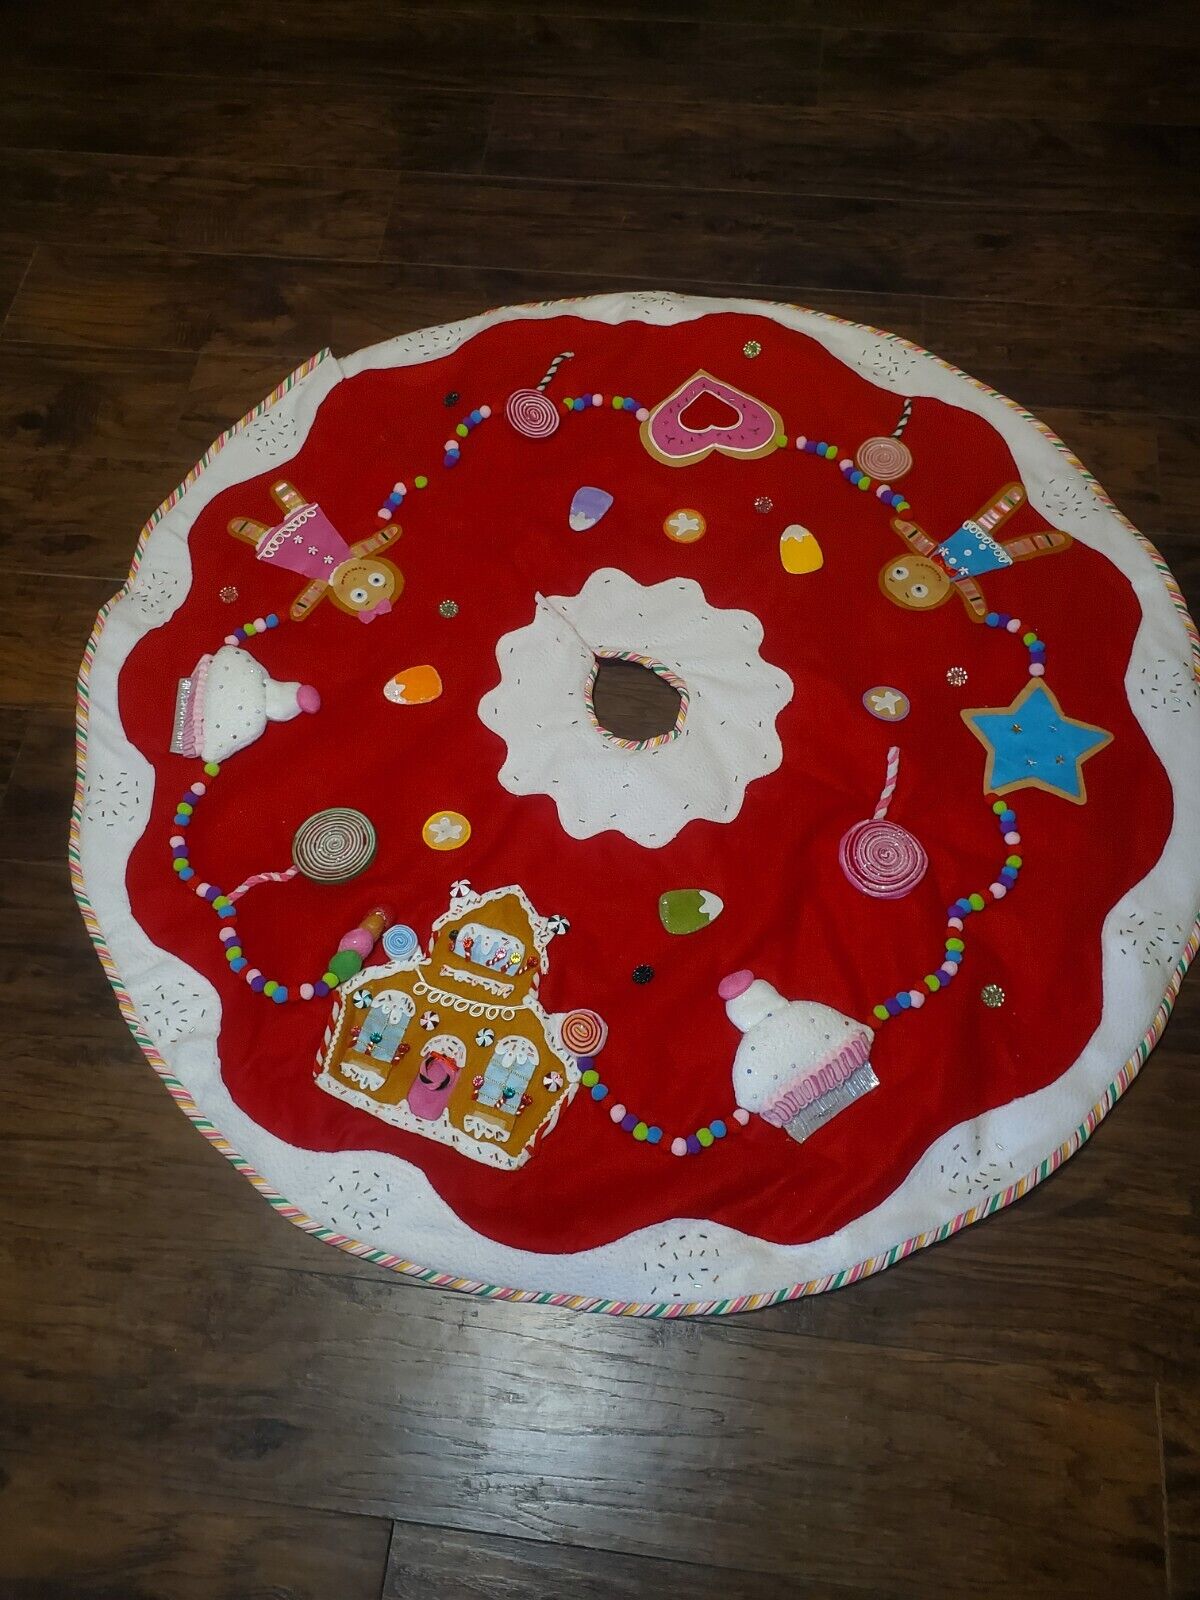 DEPARTMENT 56 GLITTERVILLE CHRISTMAS TREE SKIRT MEASURES 54 INCHES